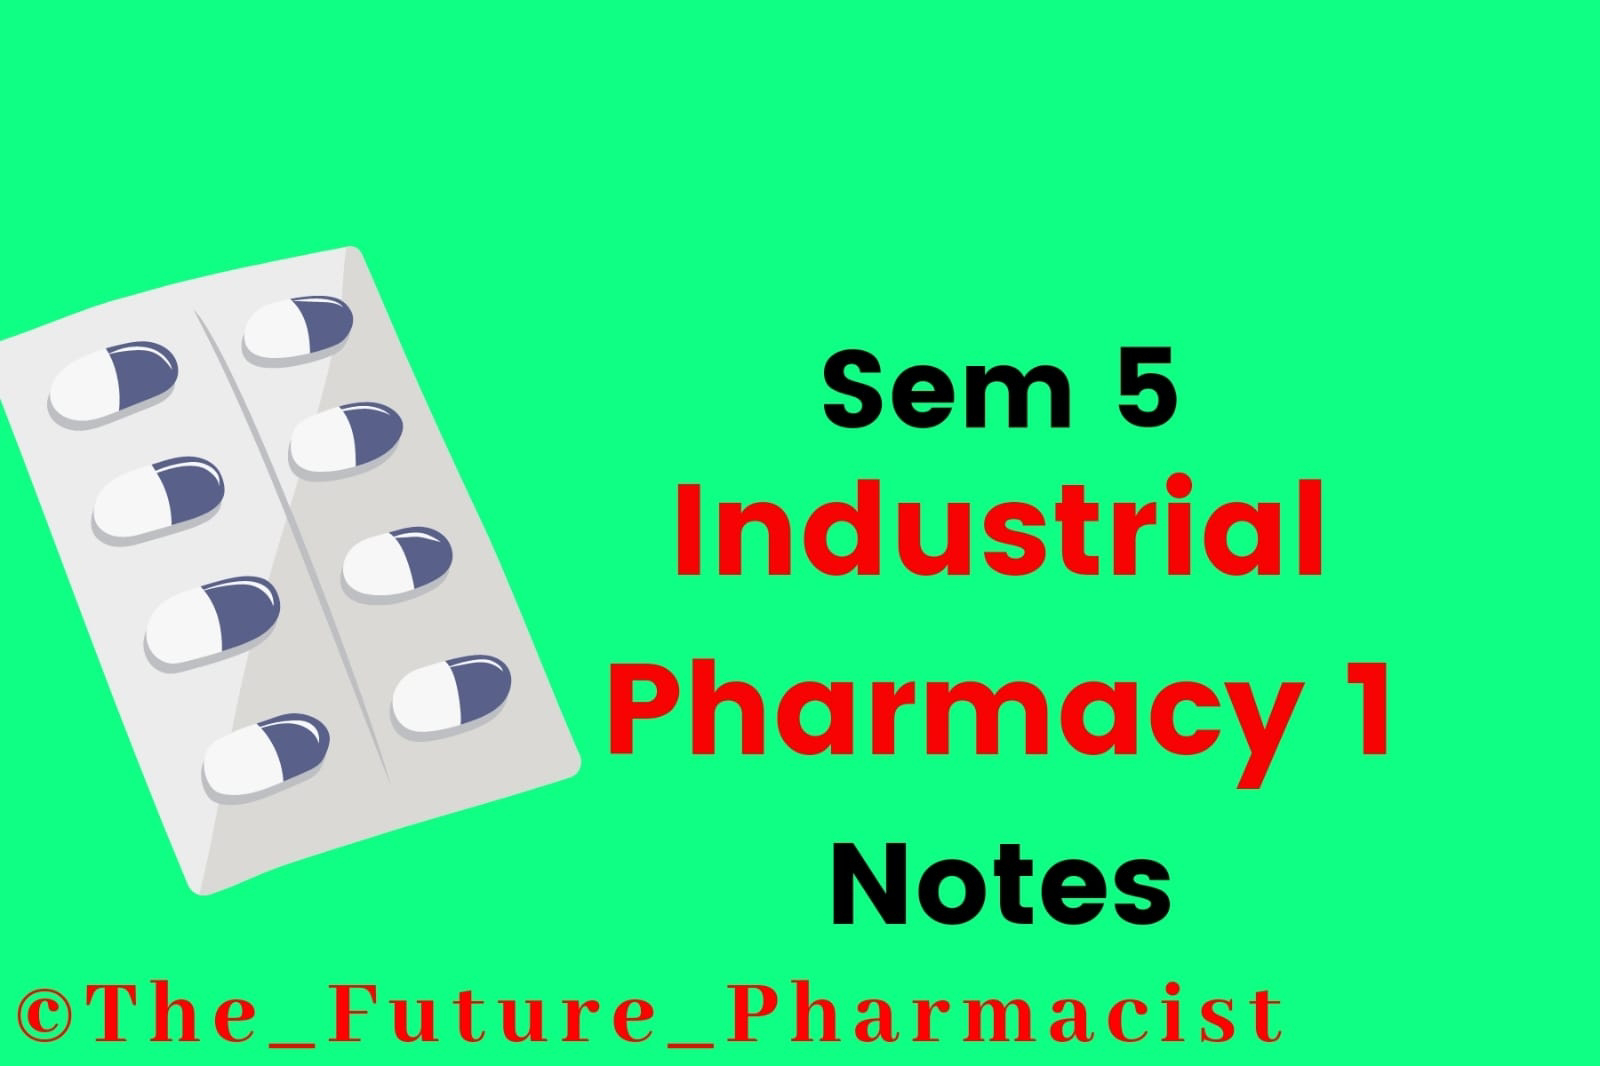 Industrial Pharmacy-I (Theory) BP 502 T. Sem 5 Notes for GPAT,NIPER, DRUG INSPECTOR and RRB Exams